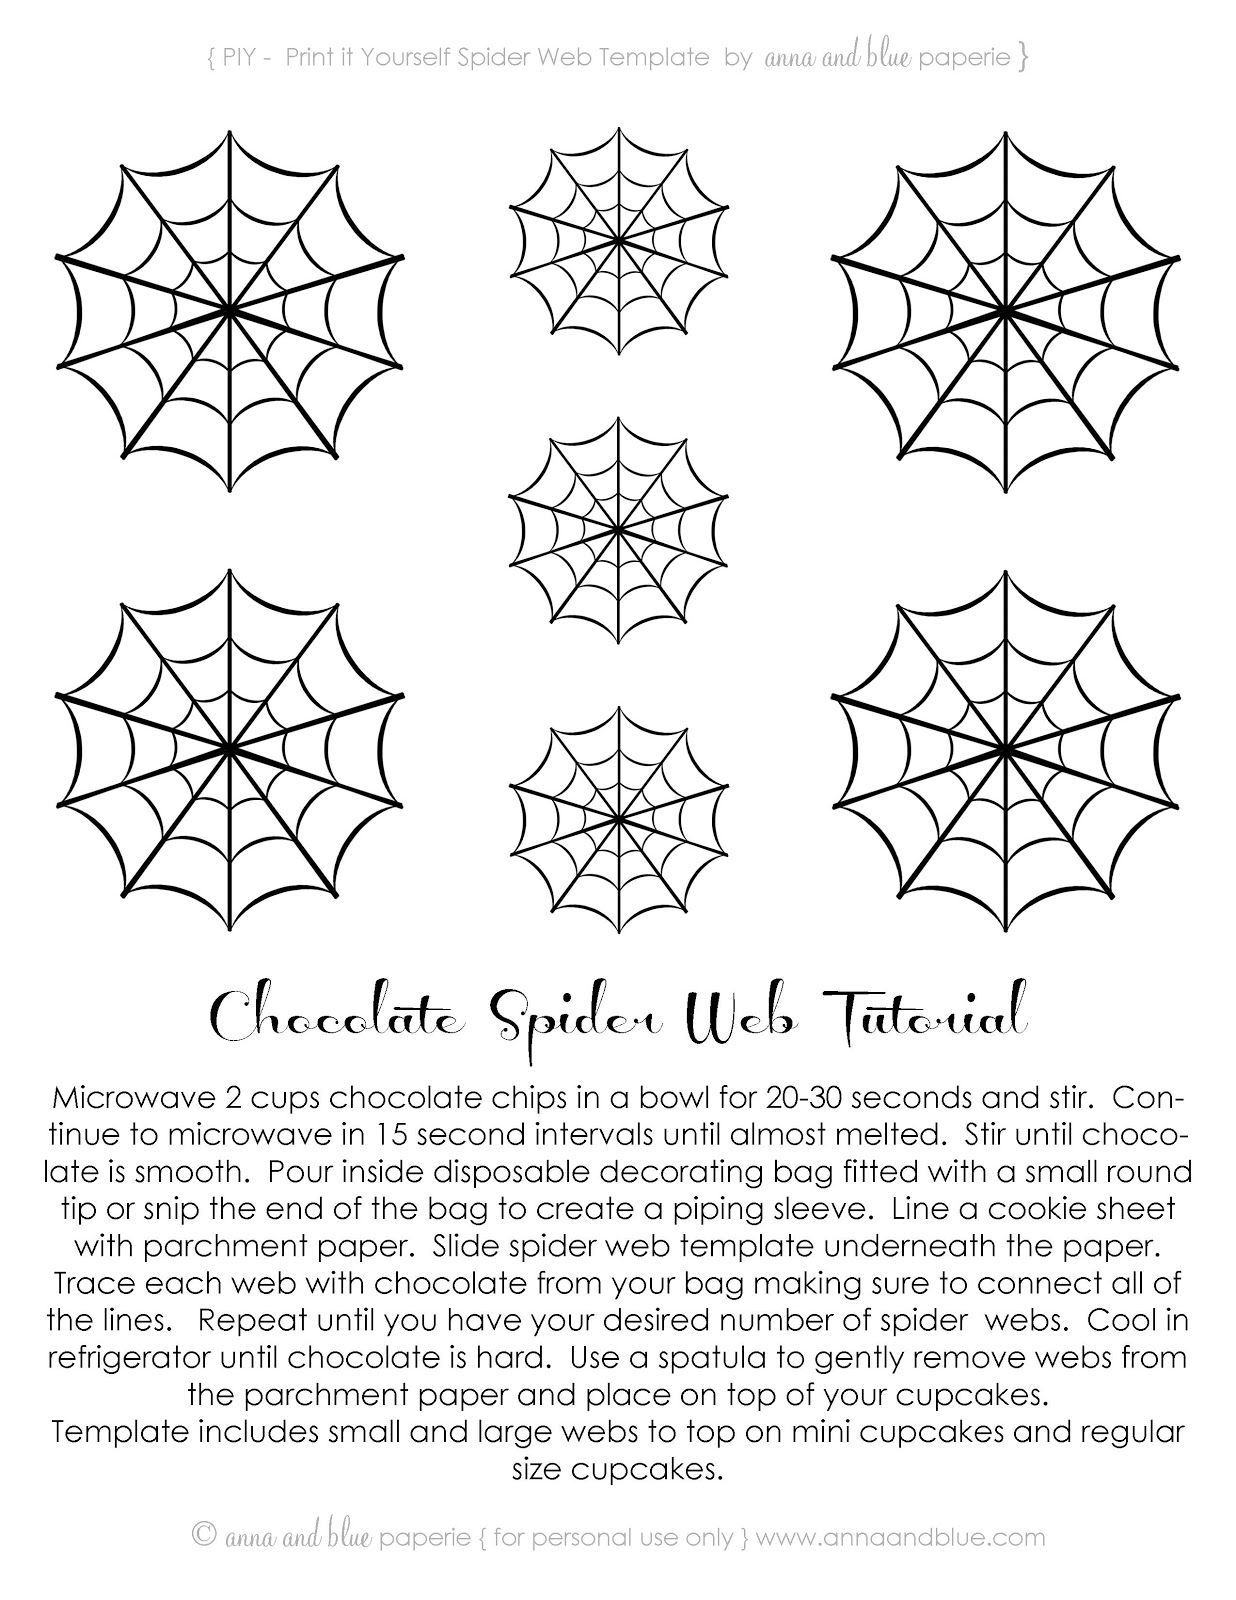 Anna And Blue Paperie Free Printable Spooktacular Spider Webs Chocolate Spiders Spiderman Cake Spiderman Birthday Party